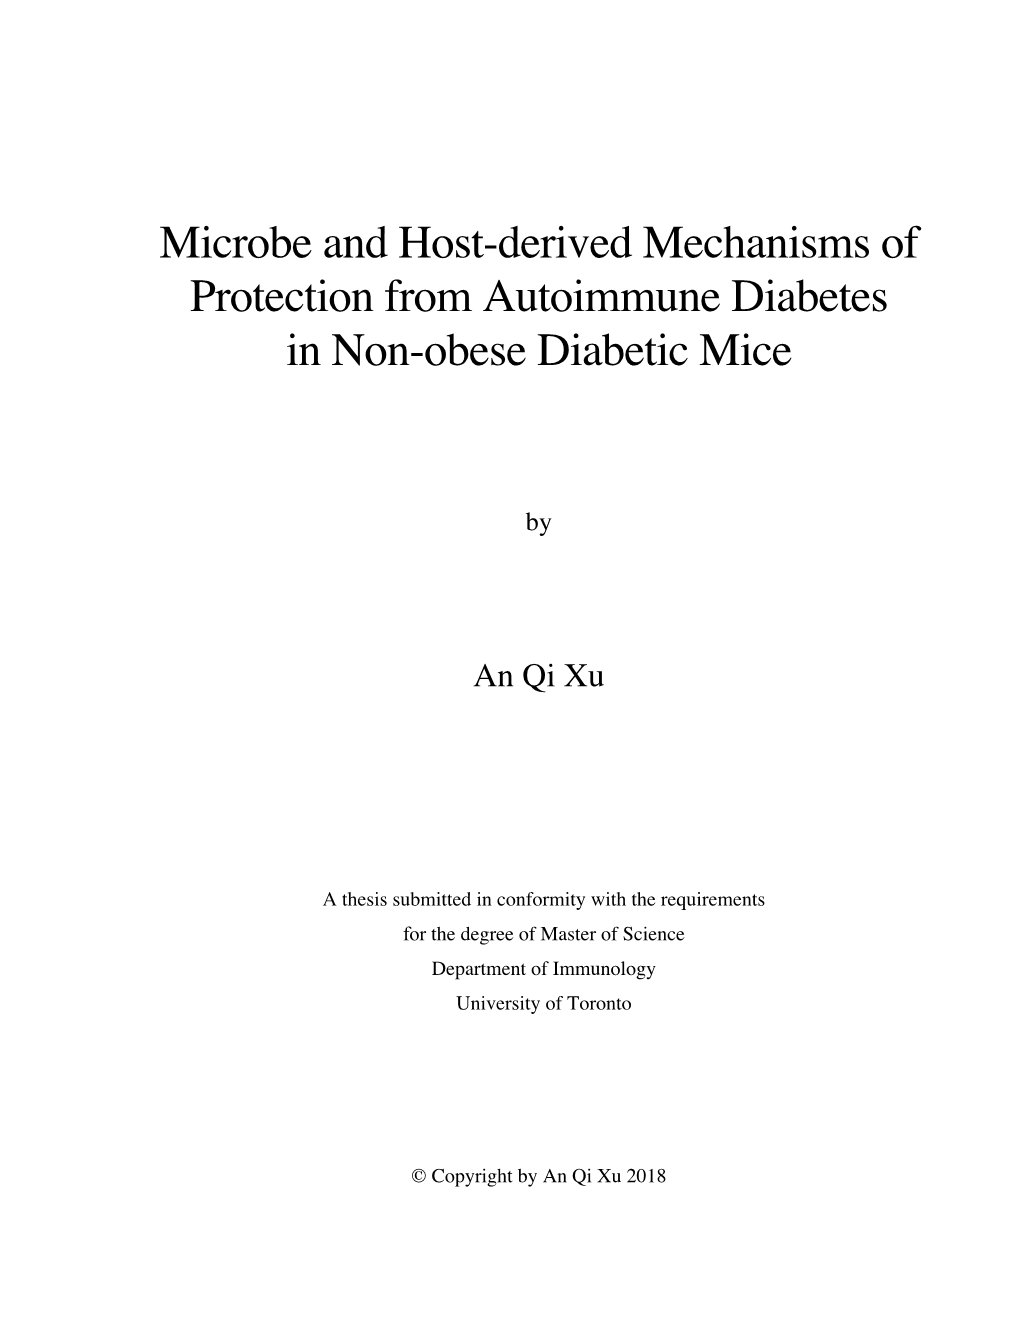 Microbe and Host-Derived Mechanisms of Protection from Autoimmune Diabetes in Non-Obese Diabetic Mice